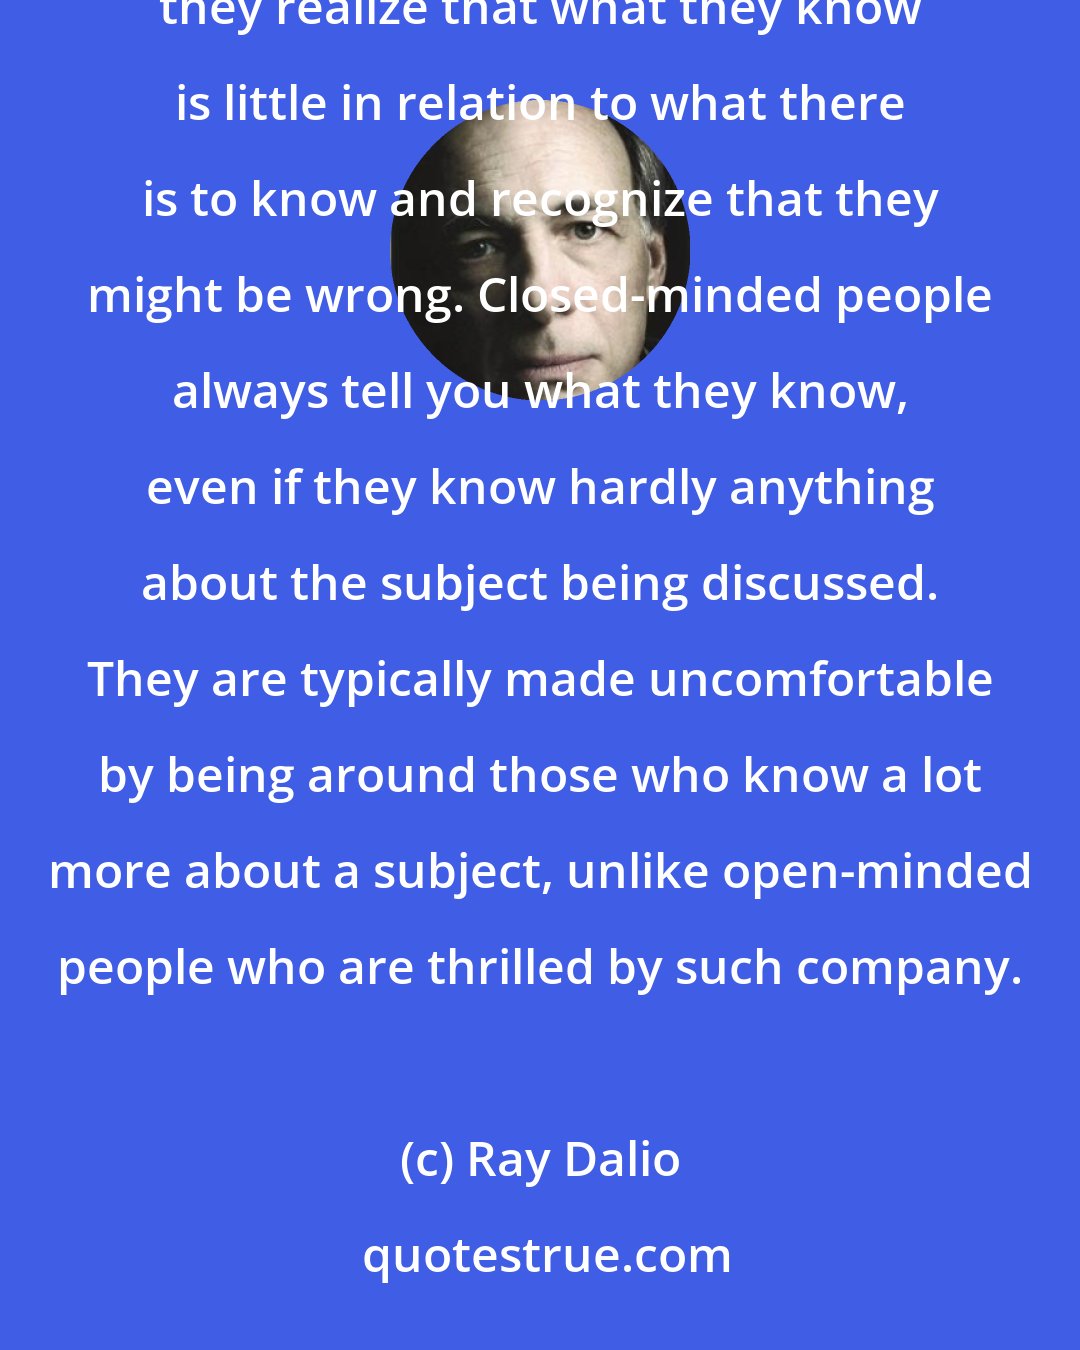 Ray Dalio: Distinguish open-minded people from closed-minded people. Open-minded people seek to learn by asking questions; they realize that what they know is little in relation to what there is to know and recognize that they might be wrong. Closed-minded people always tell you what they know, even if they know hardly anything about the subject being discussed. They are typically made uncomfortable by being around those who know a lot more about a subject, unlike open-minded people who are thrilled by such company.